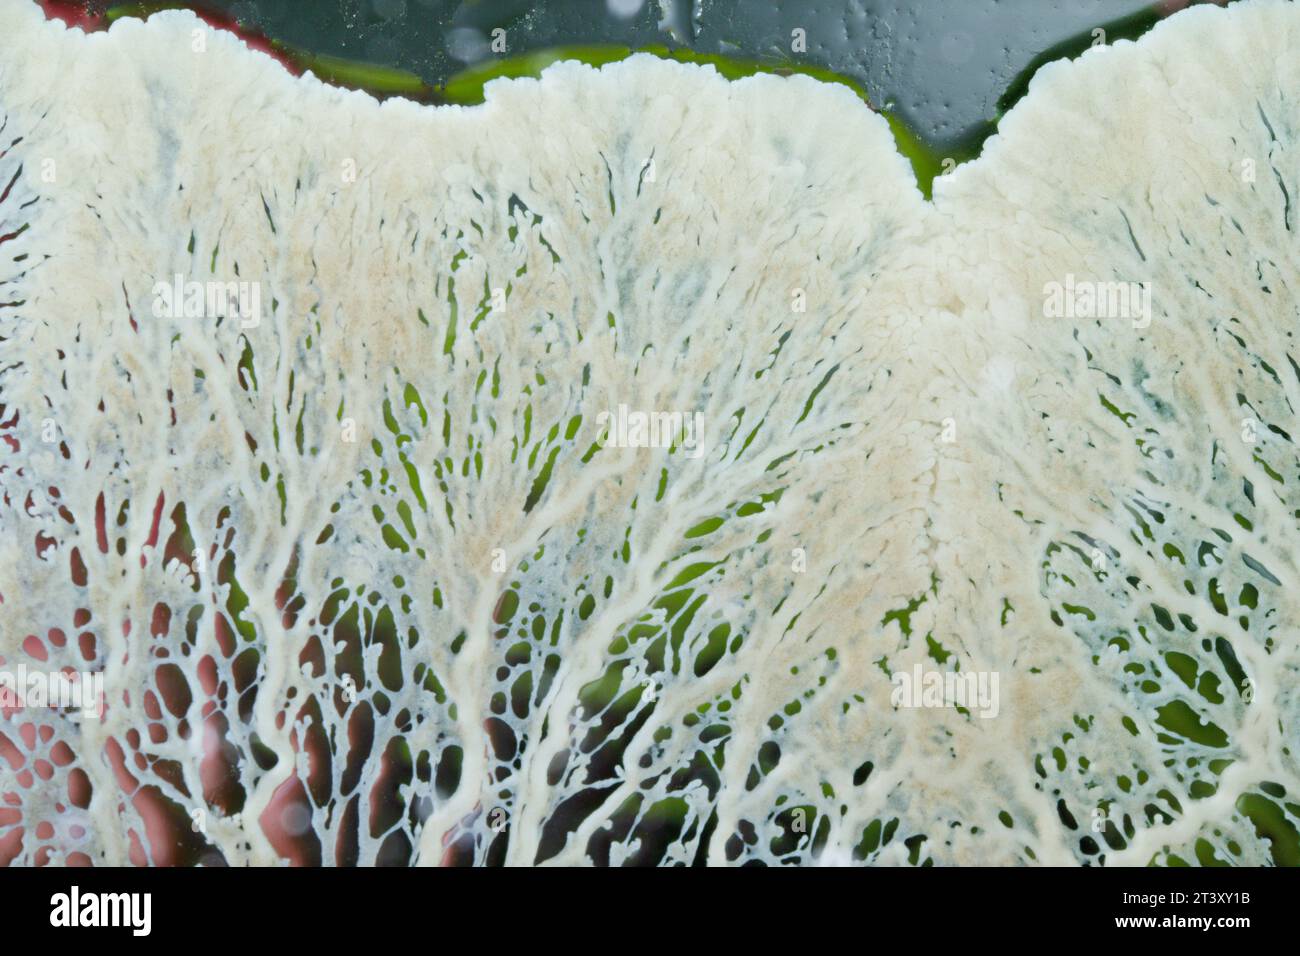 Plasmodial slime mold growing on a glass surface Stock Photo